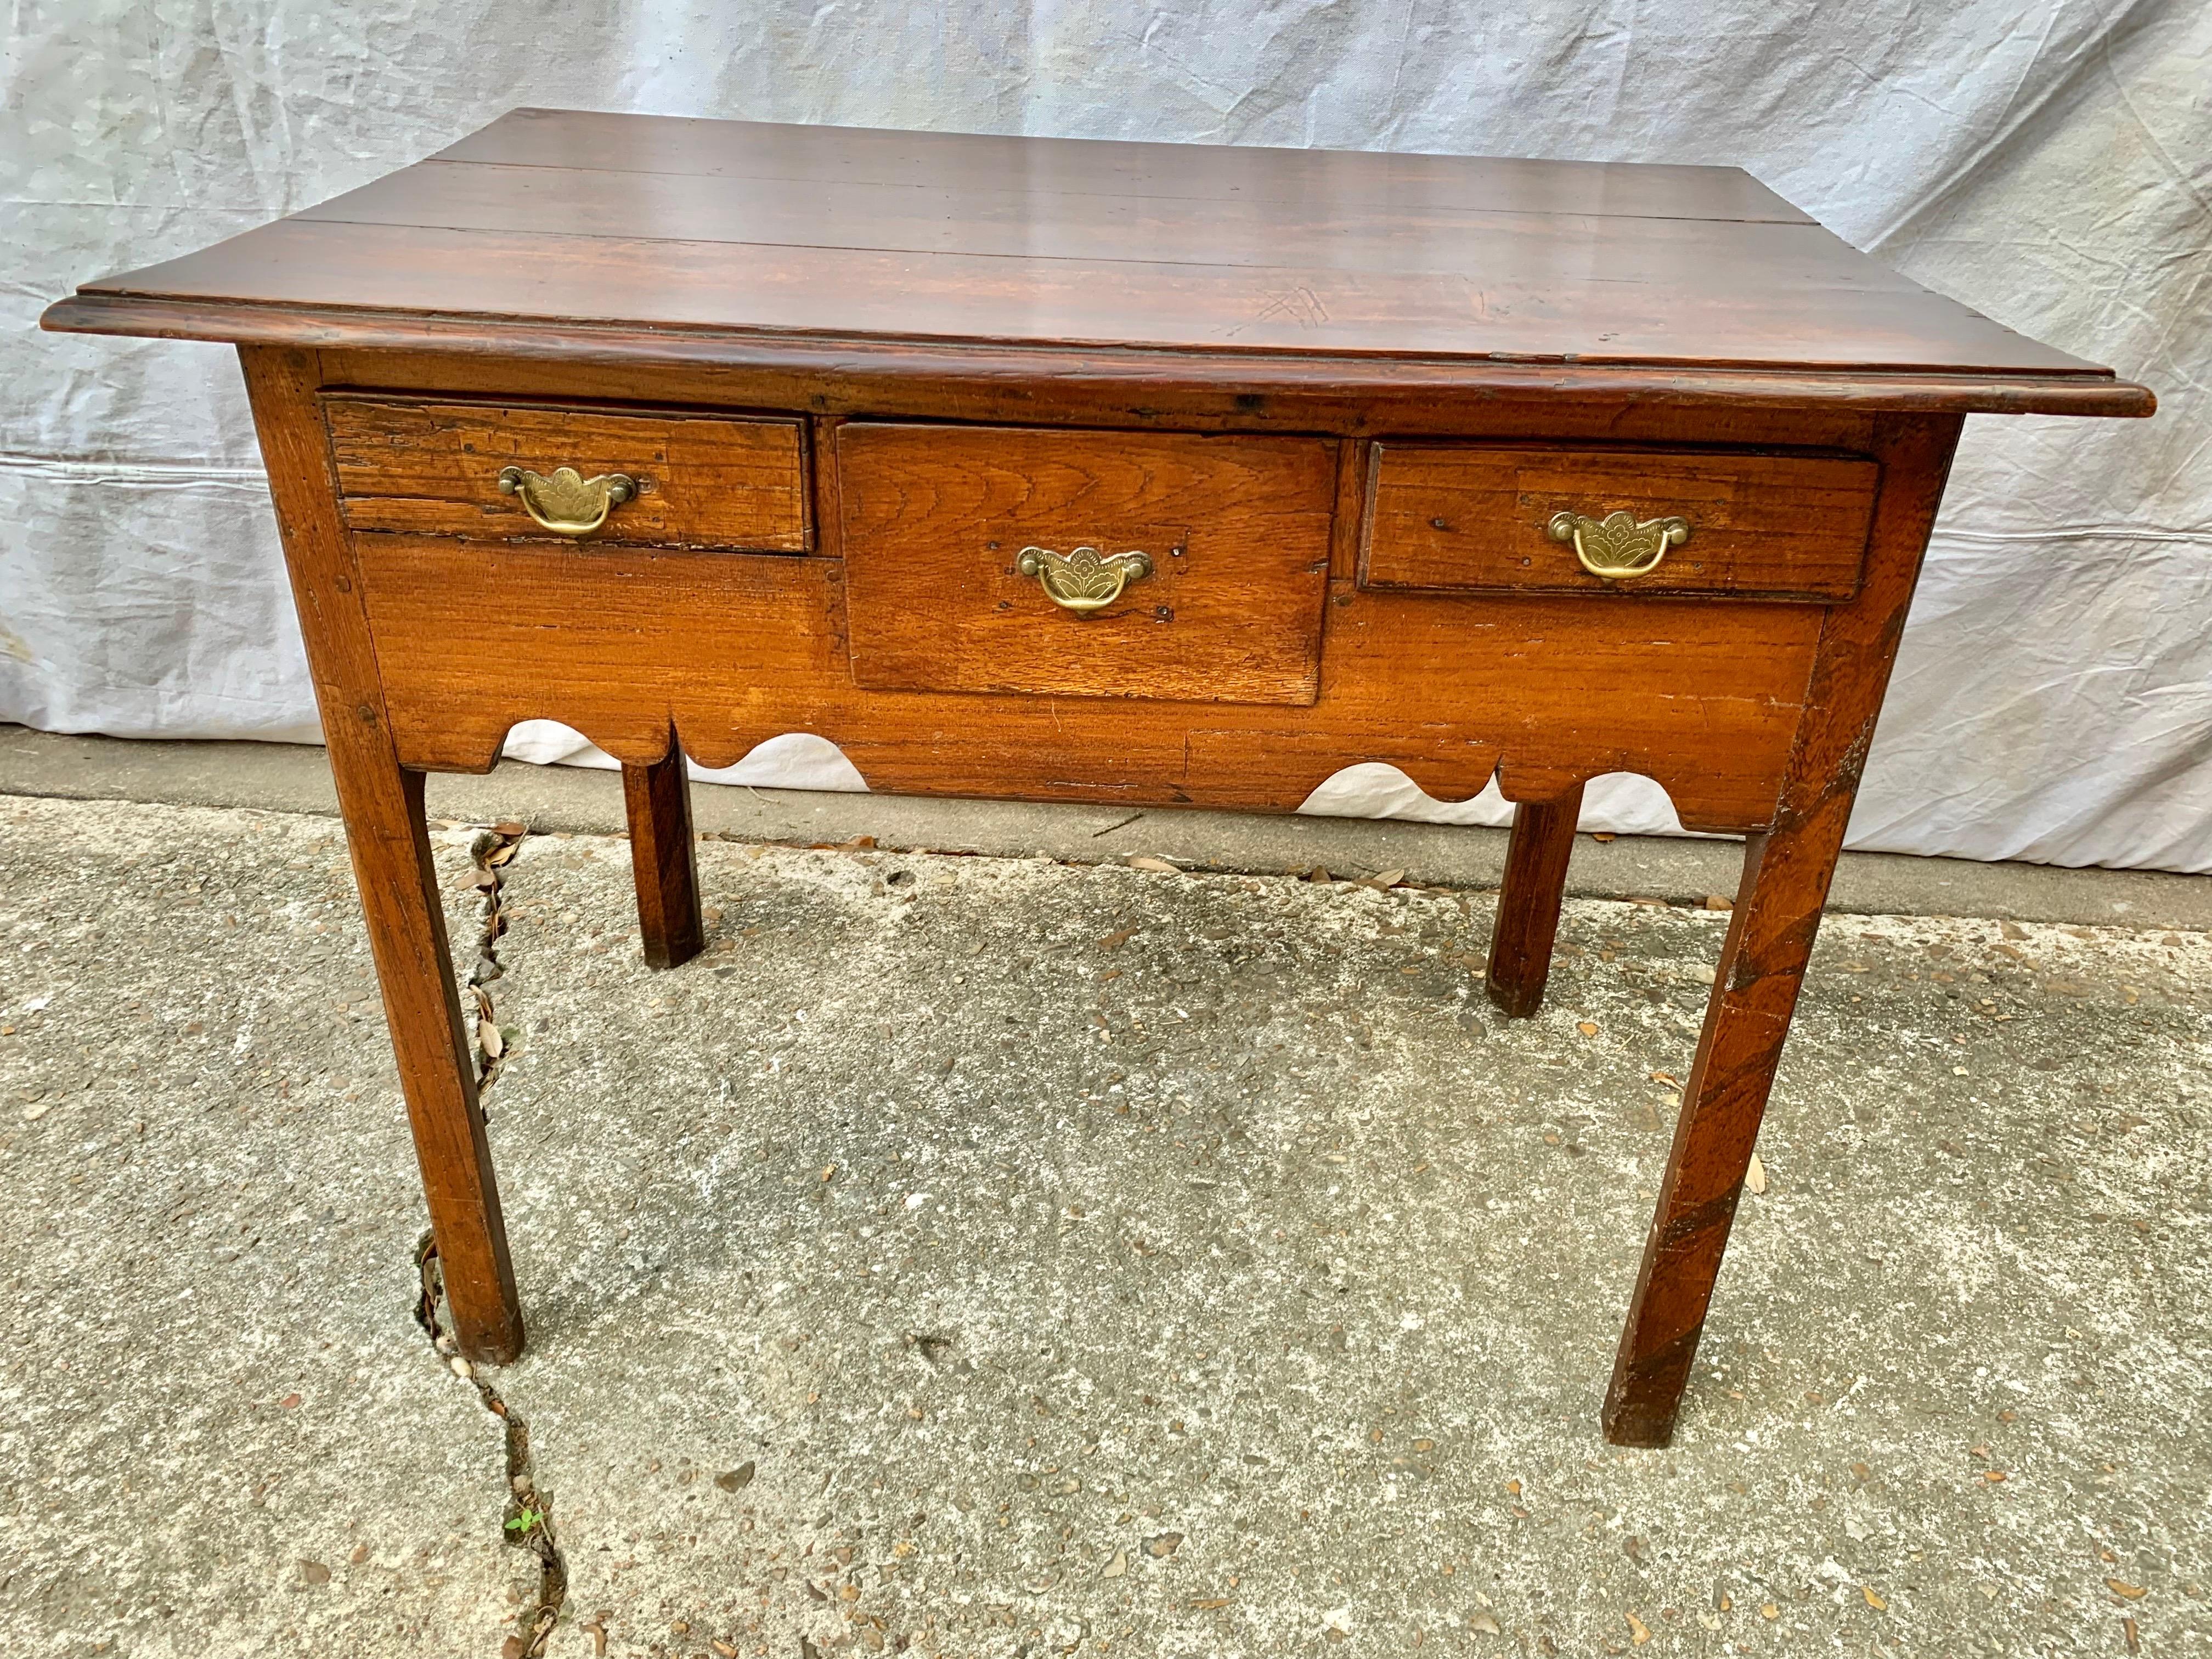 19th Century English Oak Lowboy Side Table In Good Condition For Sale In Burton, TX